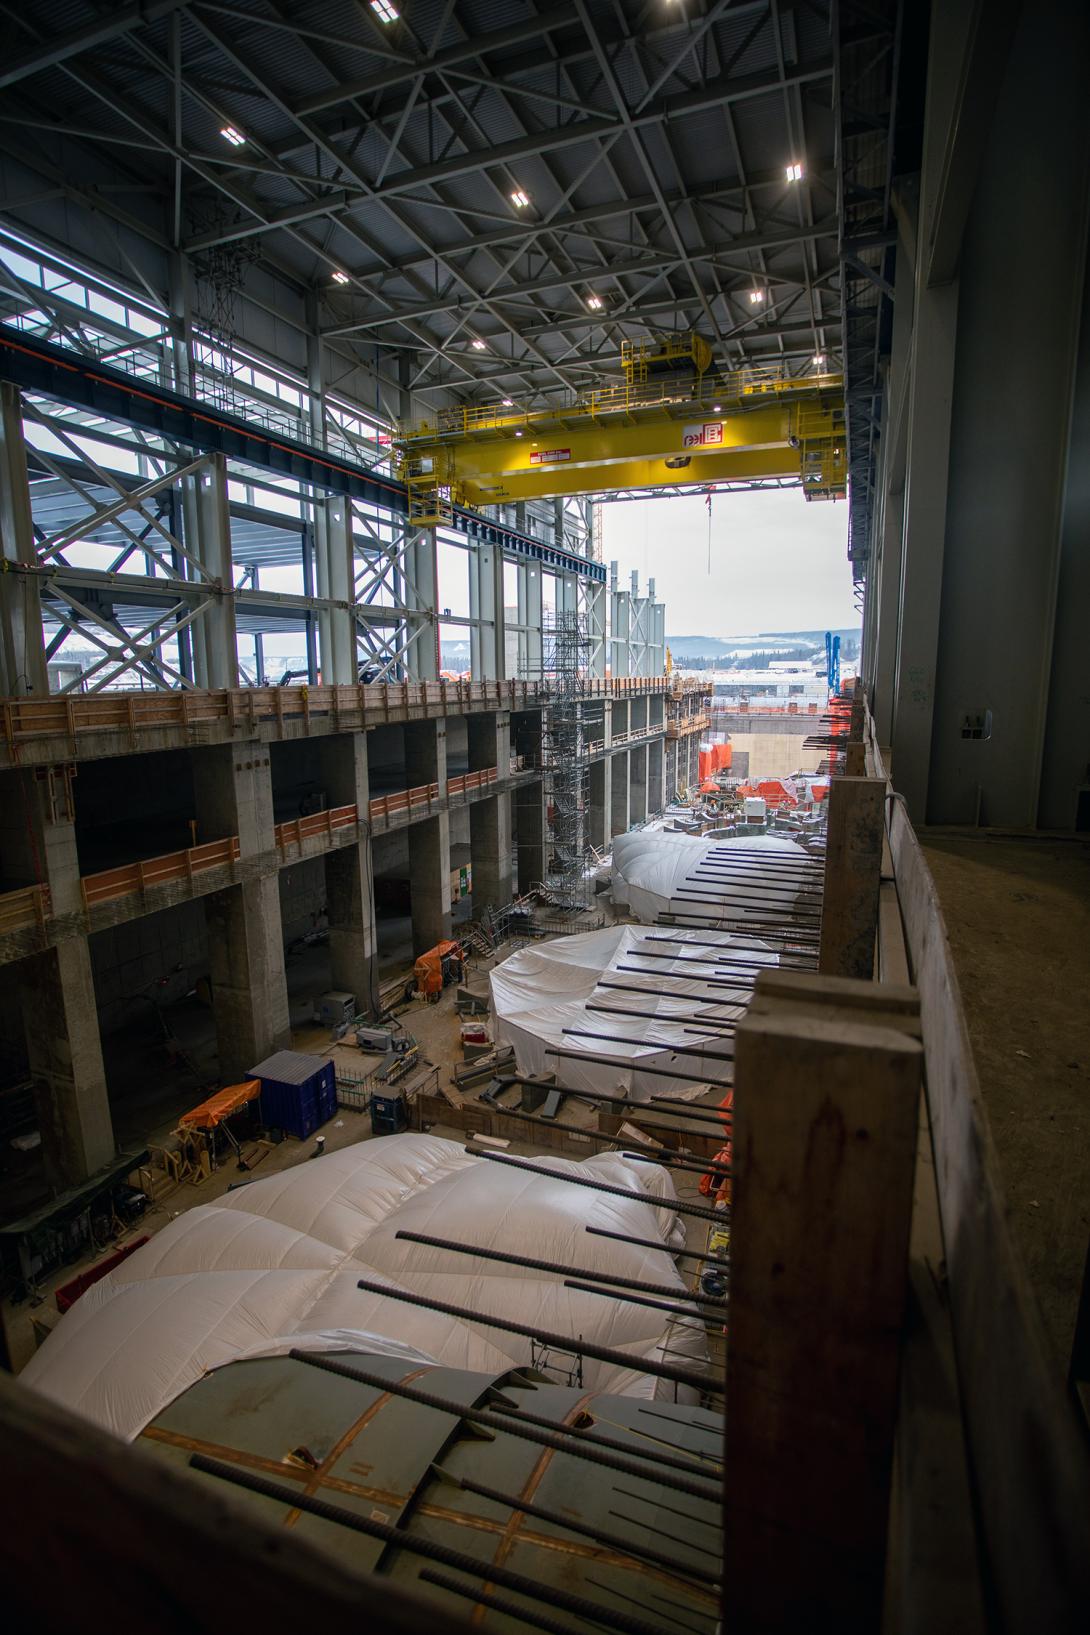 Units 1, 2, 3 and 4 are ready for turbine installation inside the powerhouse. | December 2020